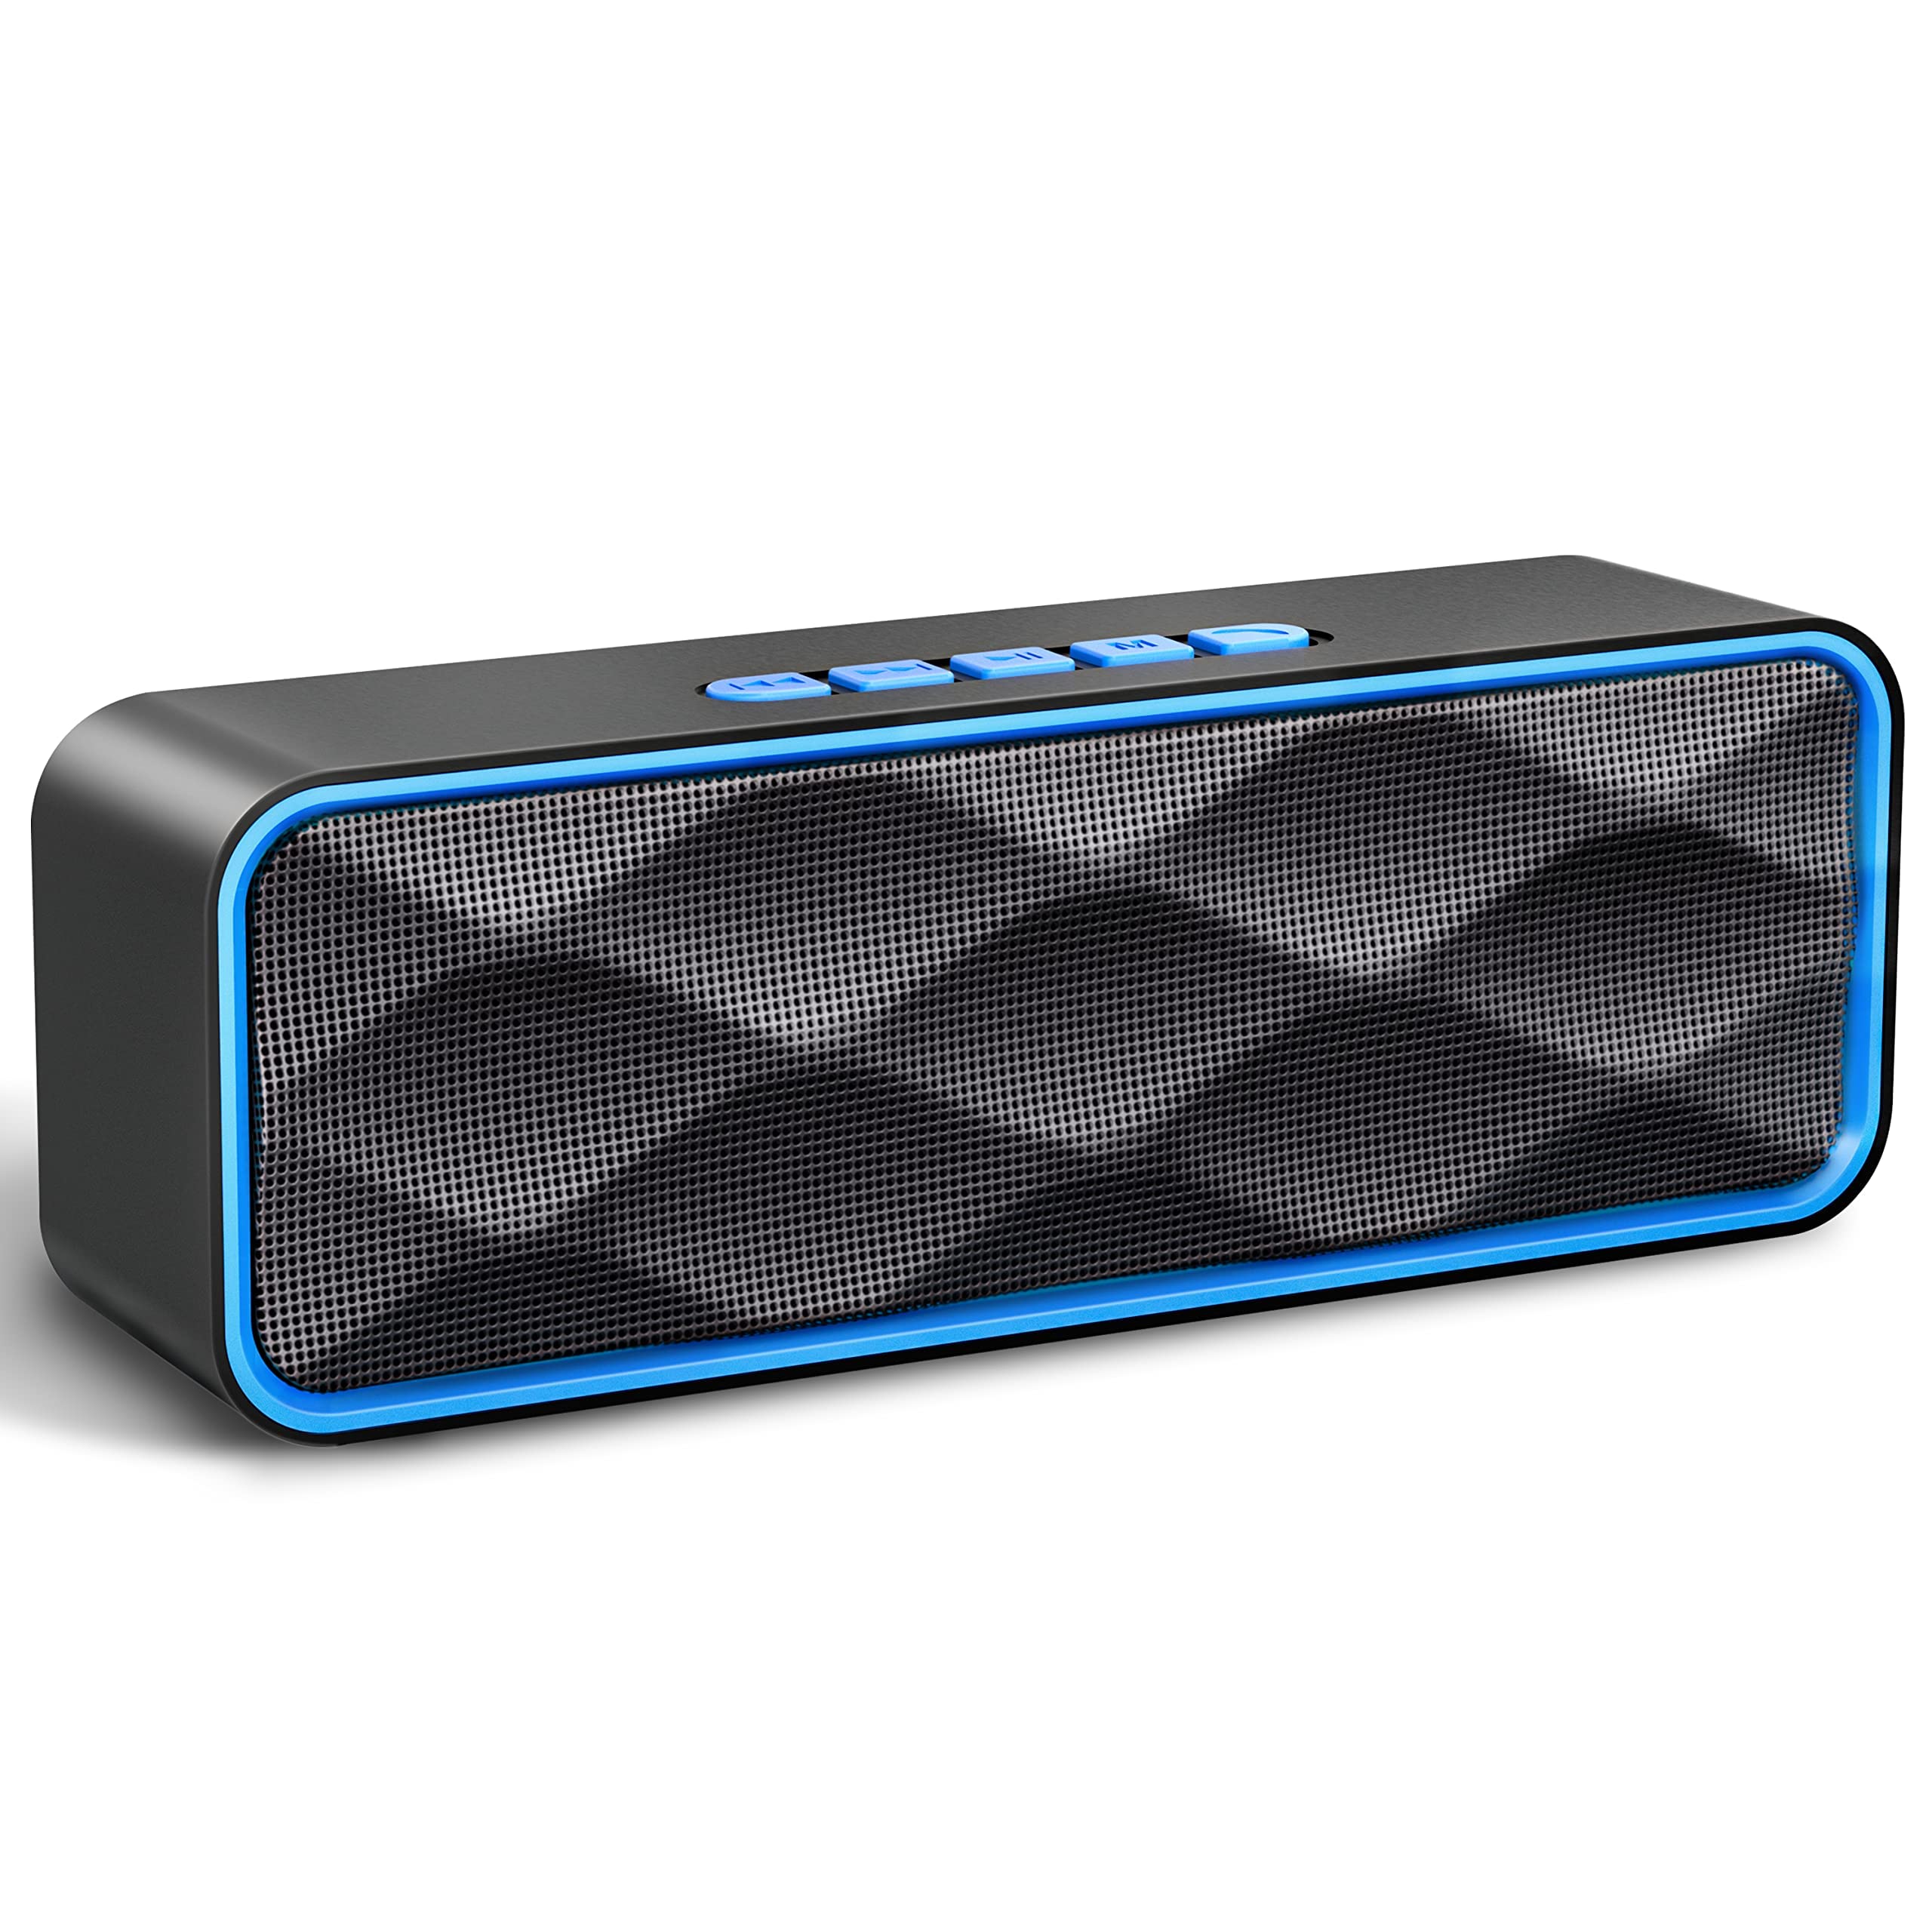 Bluetooth Speaker Wireless, Portable Speakers with Stereo Sound, Bluetooth 5.0, 8H Playtime, TF-card & AUX Input, Built-in FM Radio and Mic